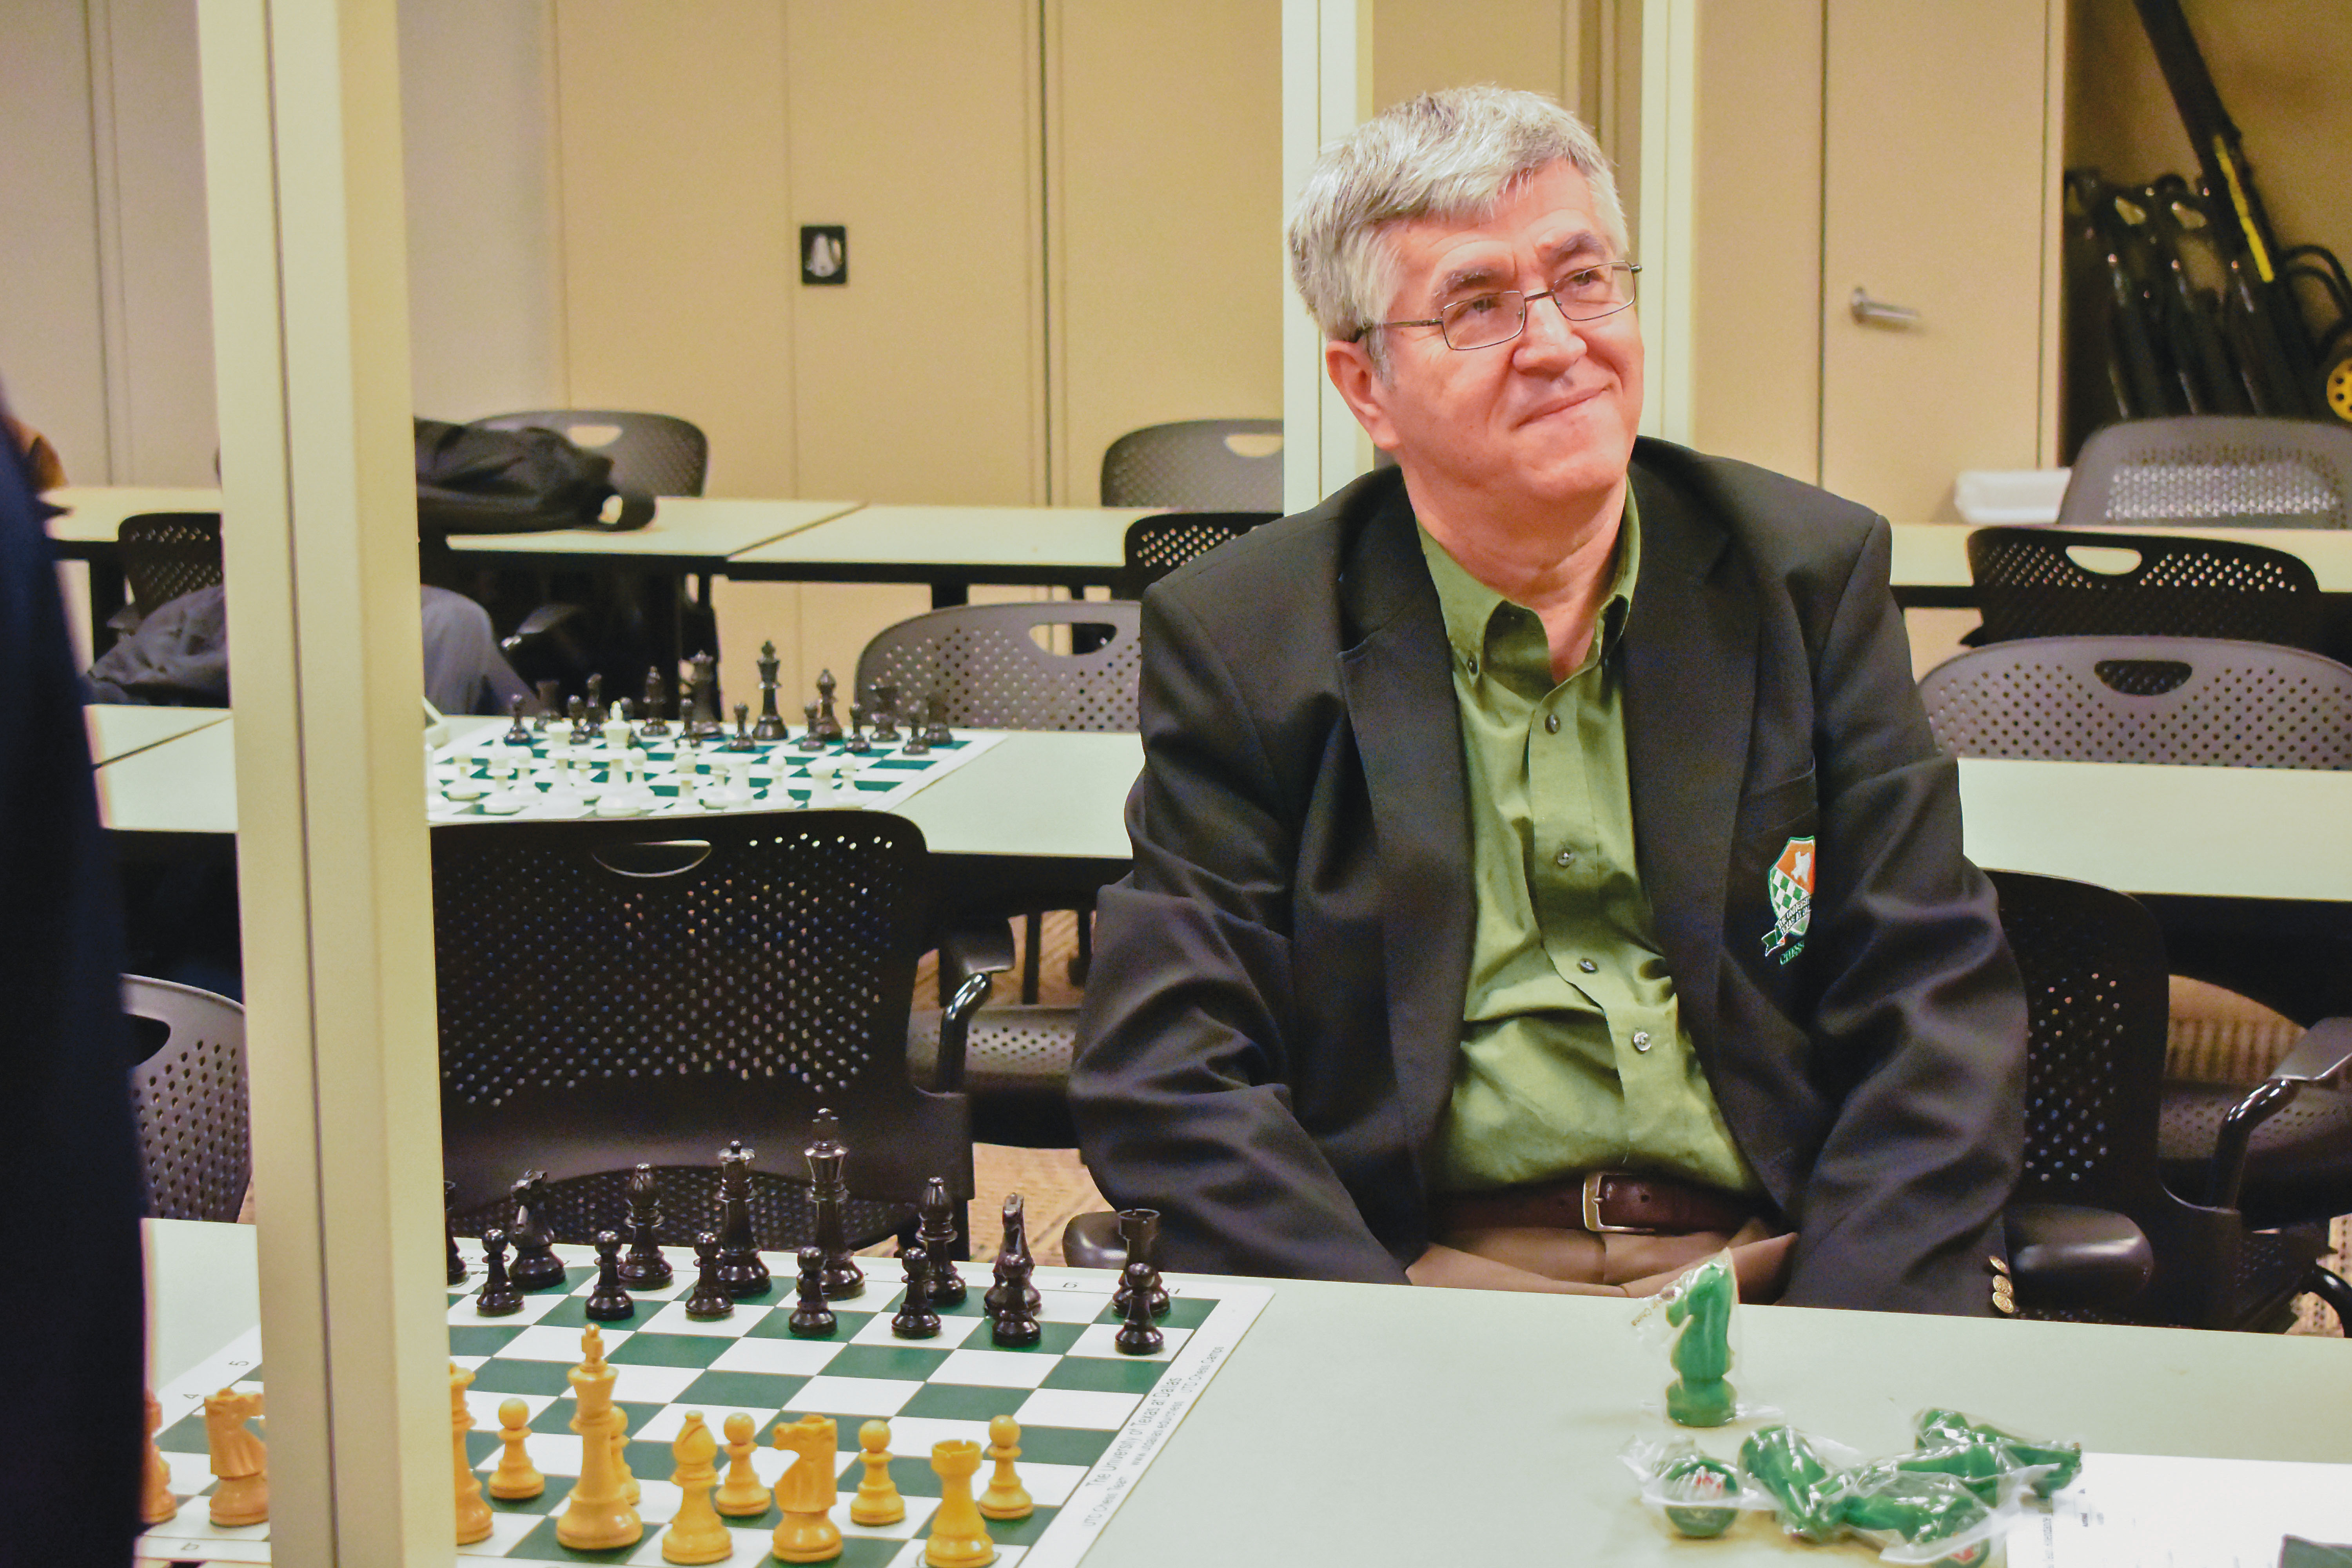 Long-time chess team coach set to retire